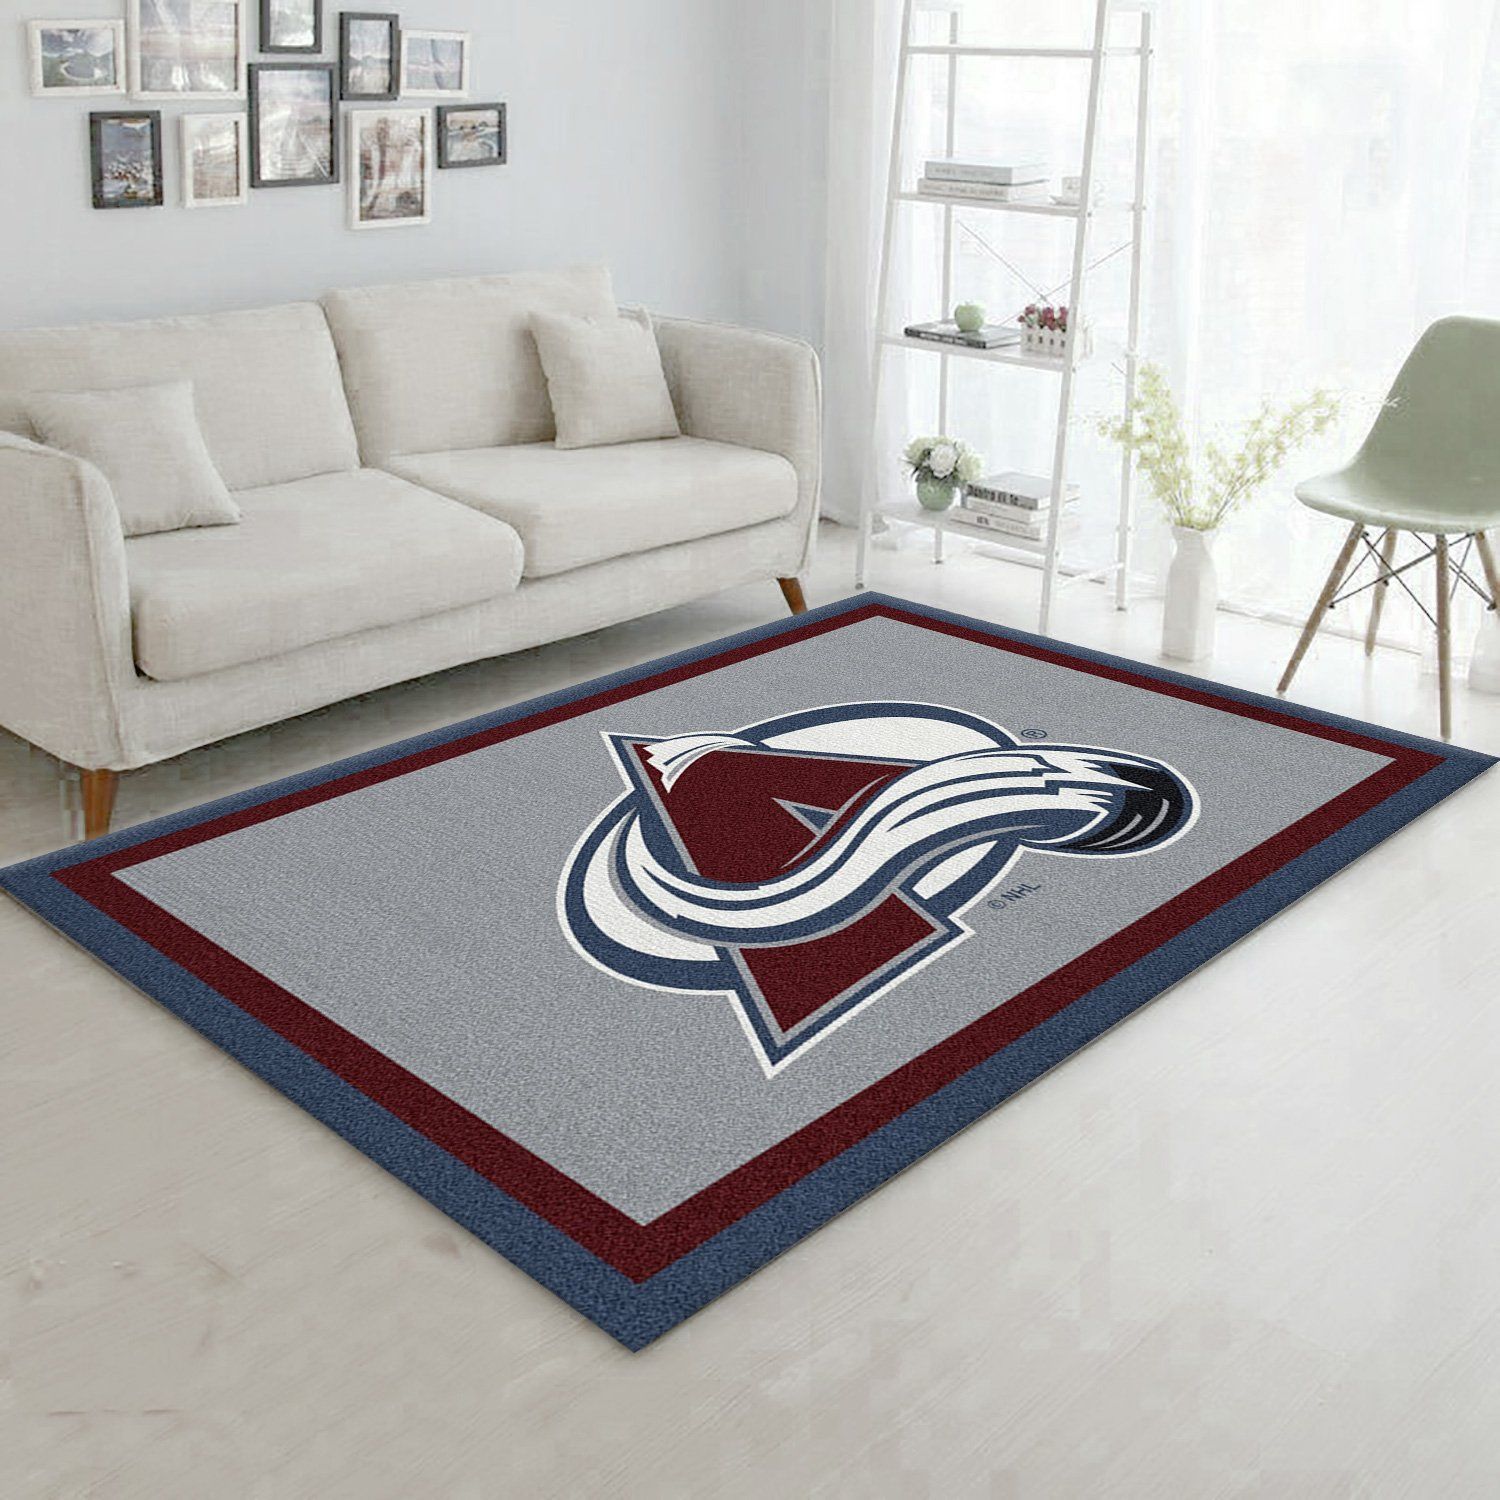 Nhl Spirit Colorado Avalanche Area Rug Carpet, Kitchen Rug, Christmas Gift US Decor - Indoor Outdoor Rugs 1